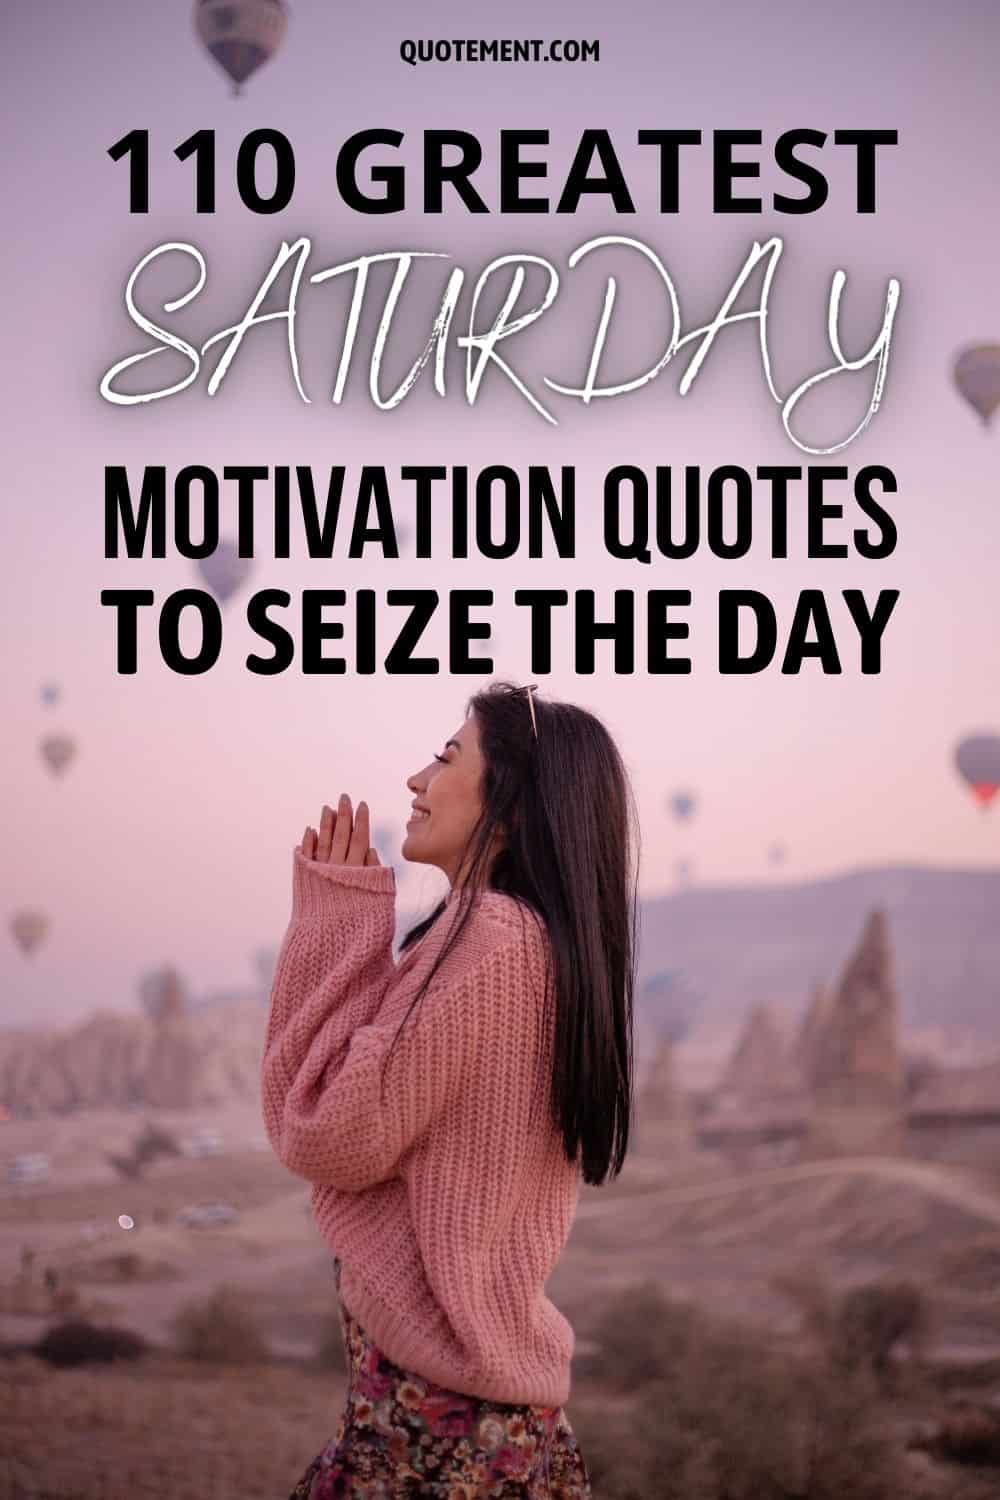 110 Greatest Saturday Motivation Quotes To Seize The Day 